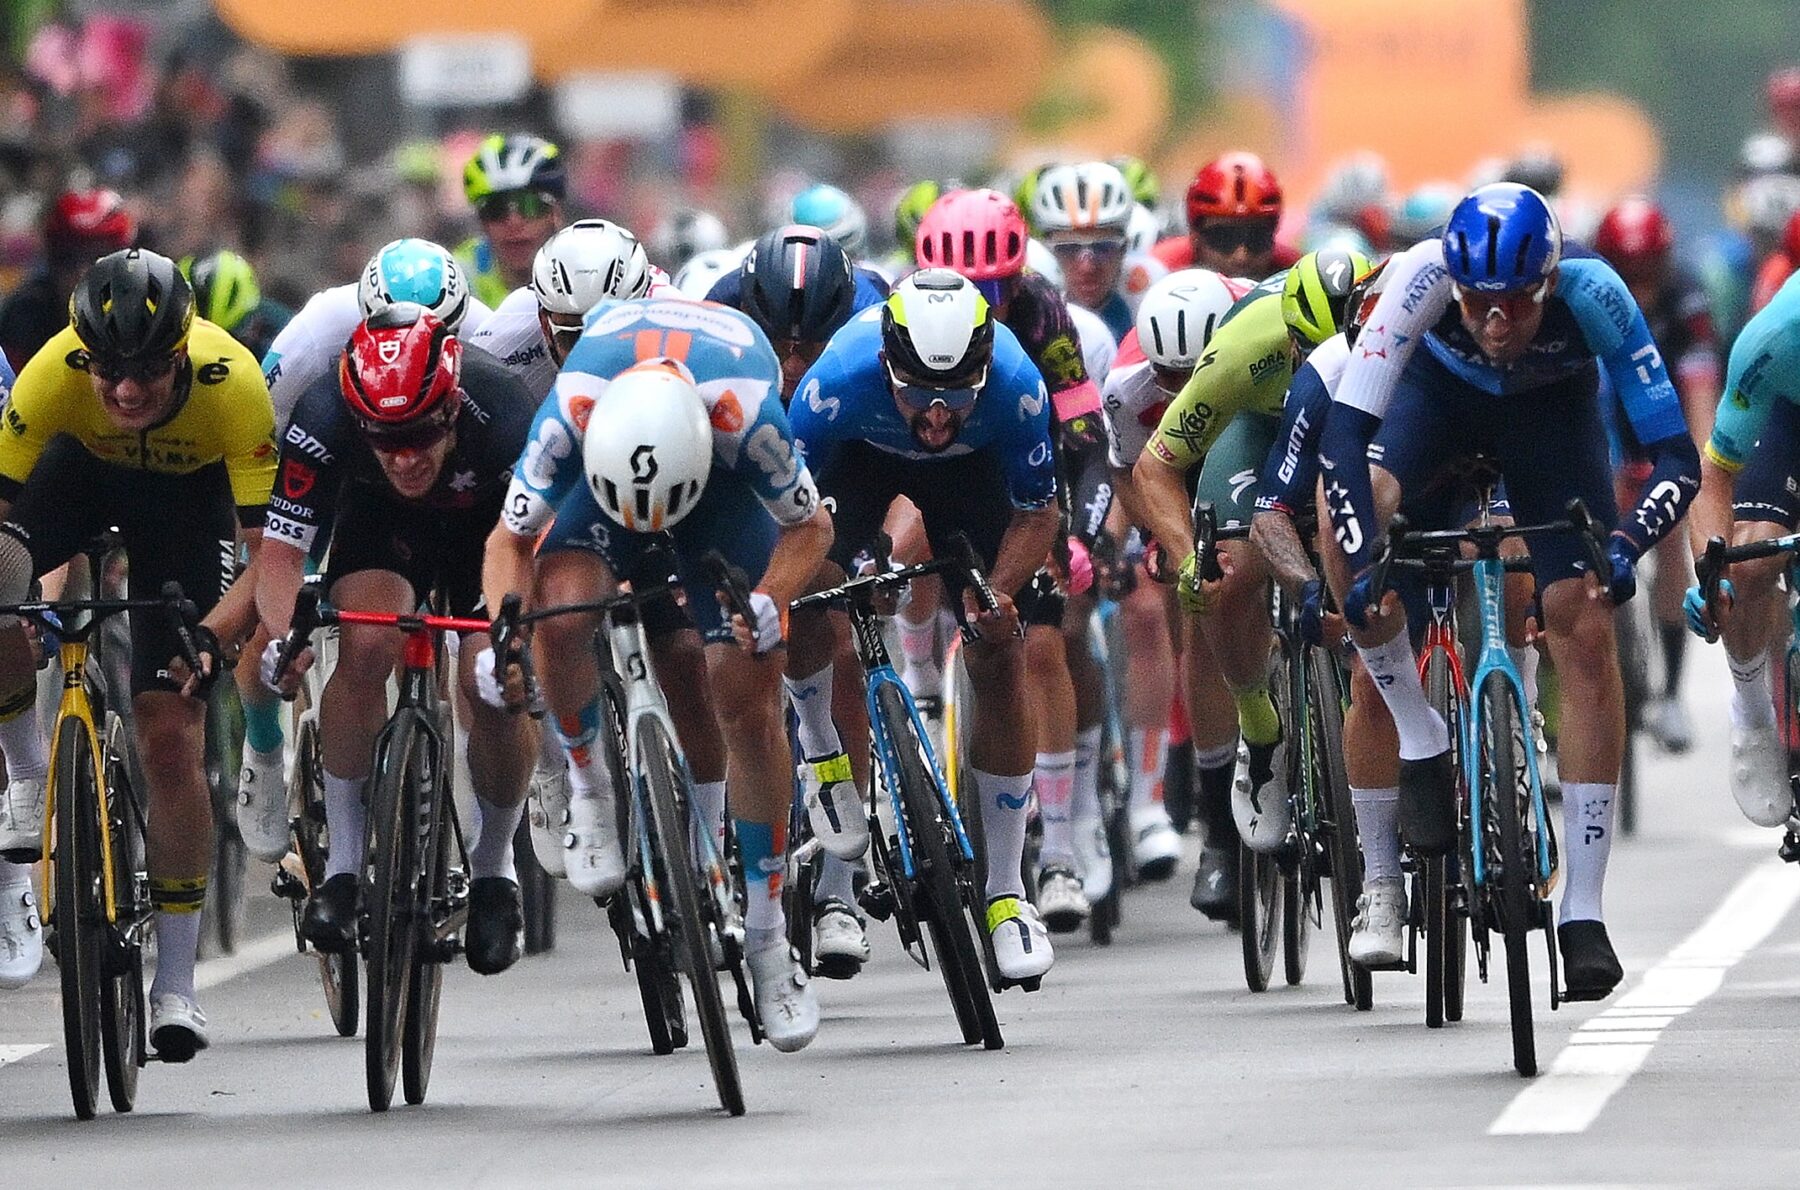 Gaviria 9th in Fossano after great Blue team-work, Rubio up to fourth overall